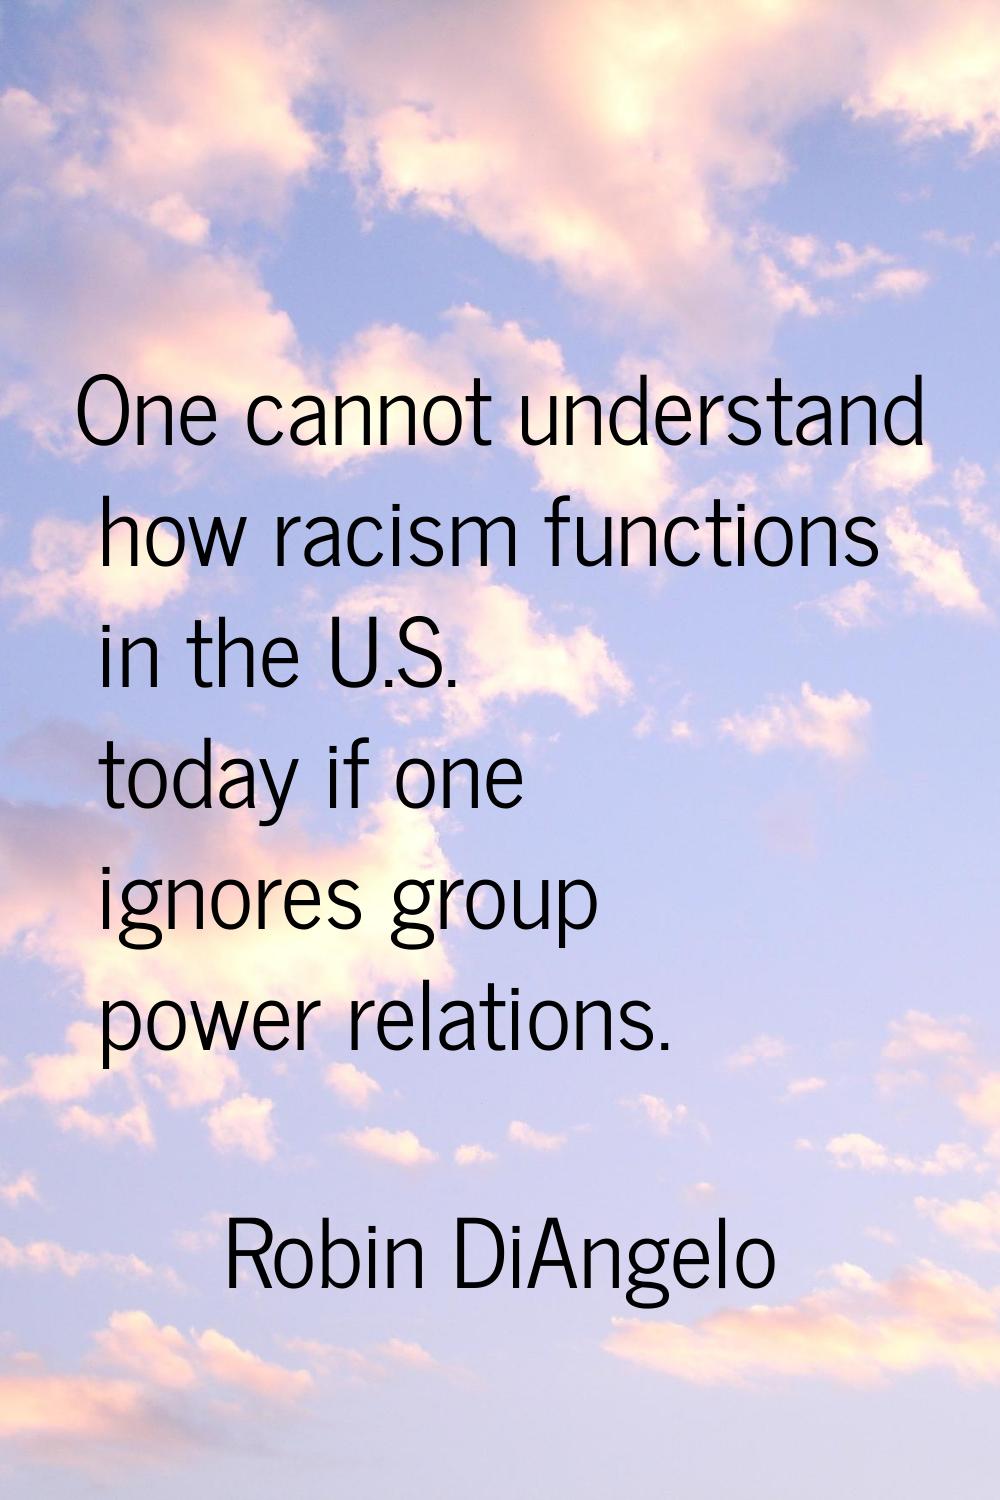 One cannot understand how racism functions in the U.S. today if one ignores group power relations.